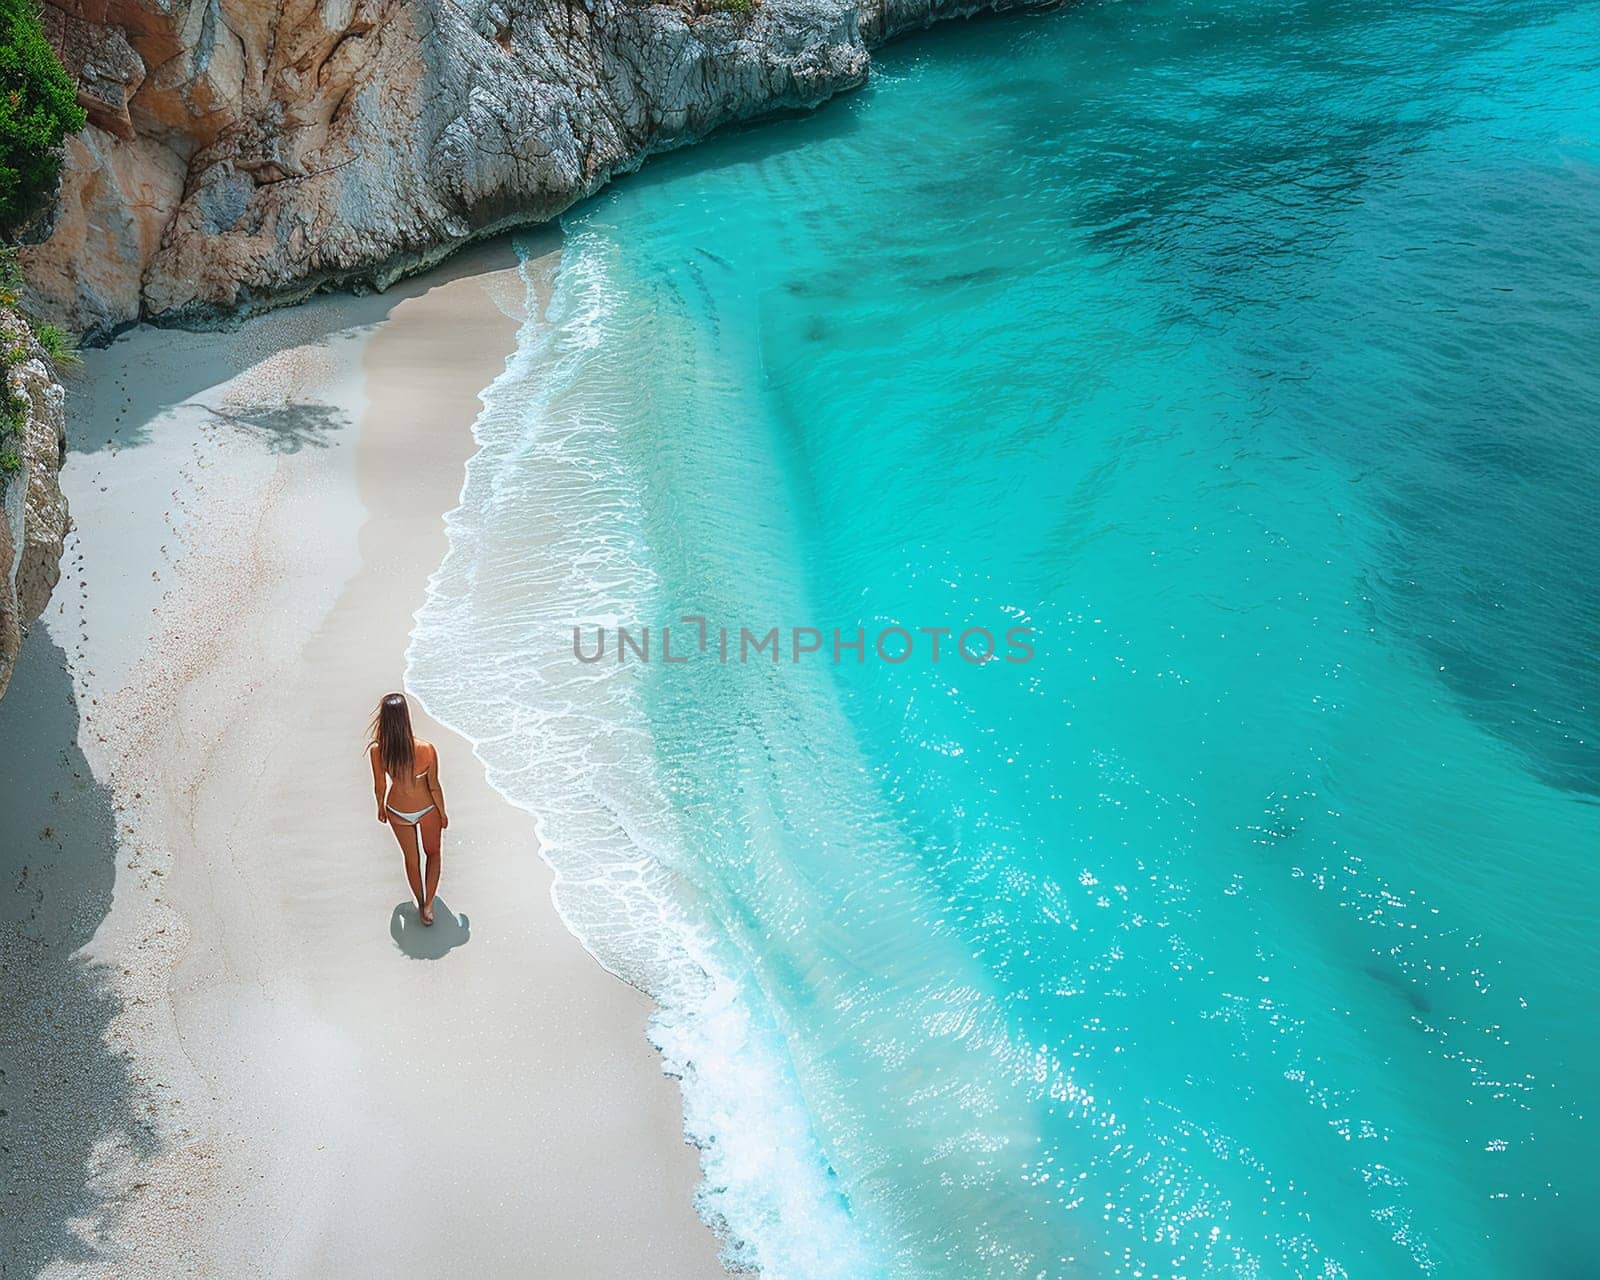 Pristine beach with turquoise water, inspiring travel and relaxation.